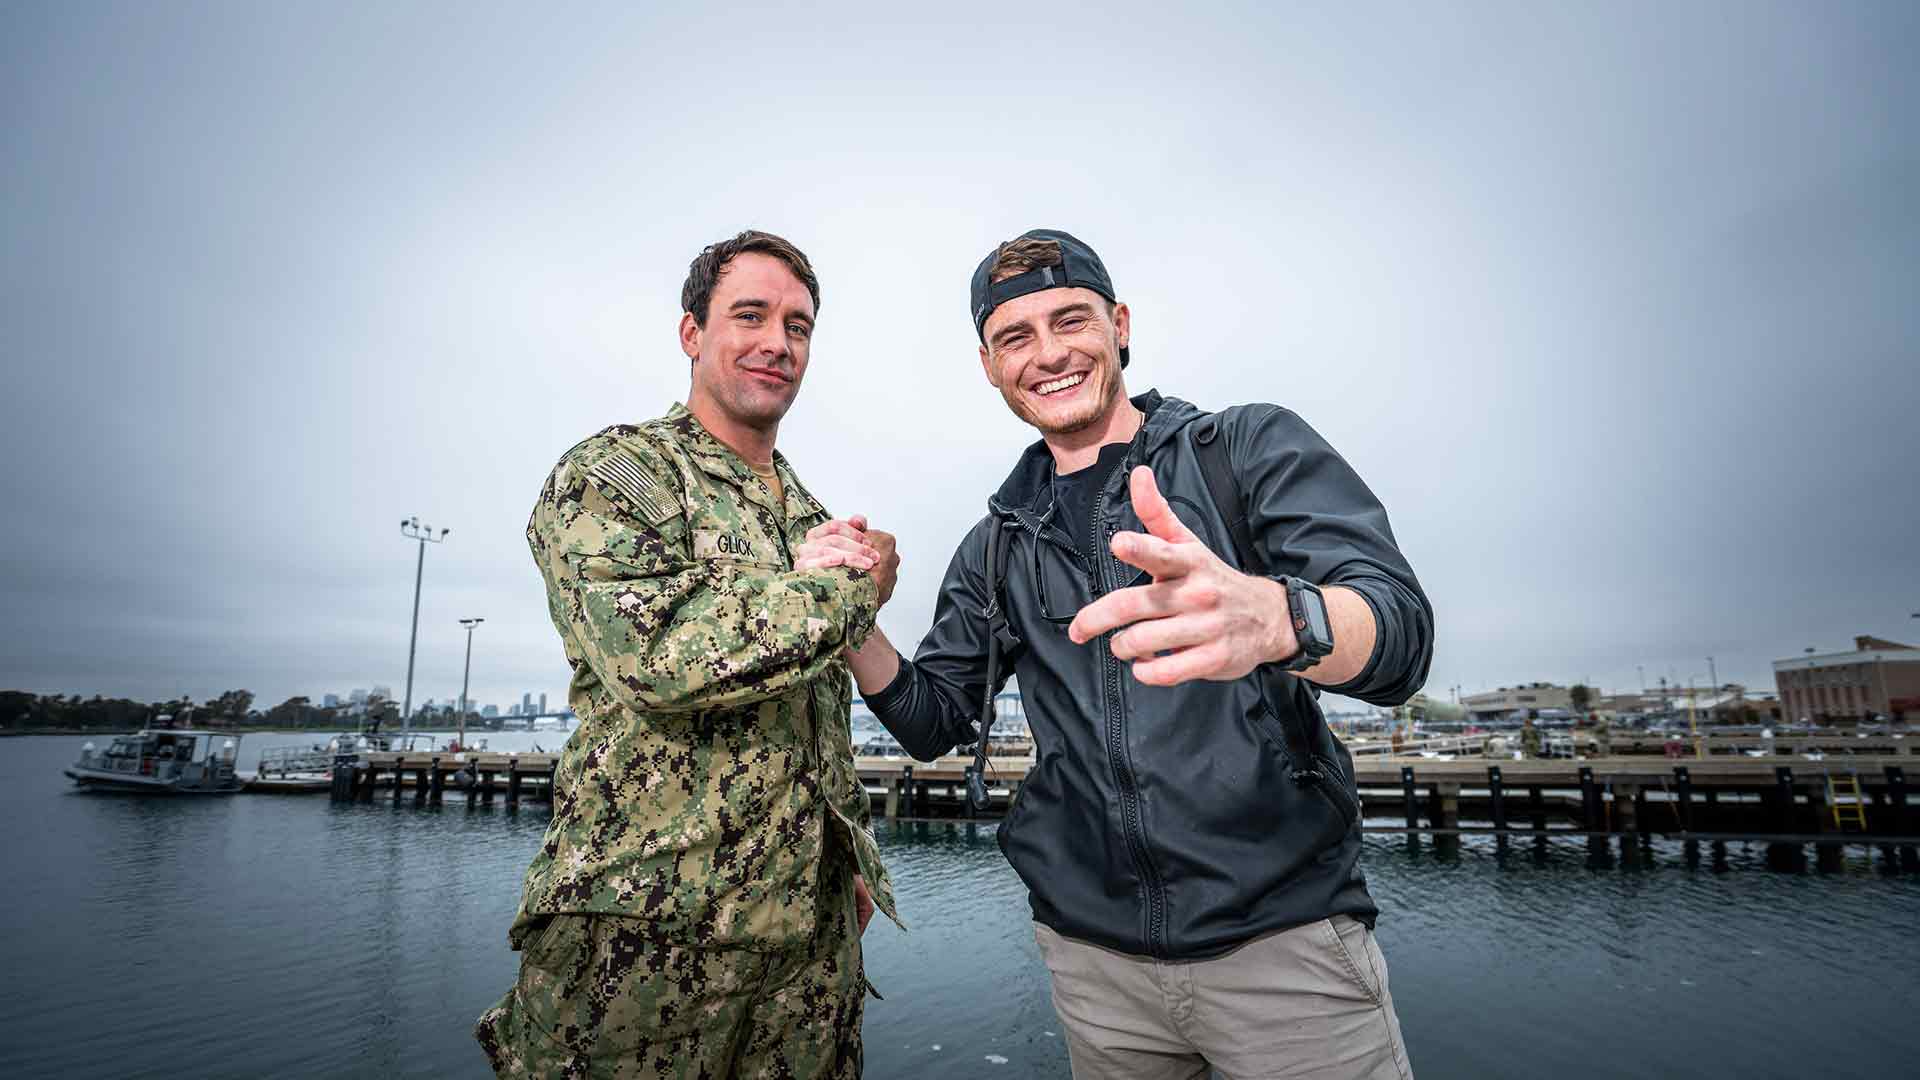 YouTube creator DALLMYD shakes hands with NAVY EOD diver after concluding their challenge